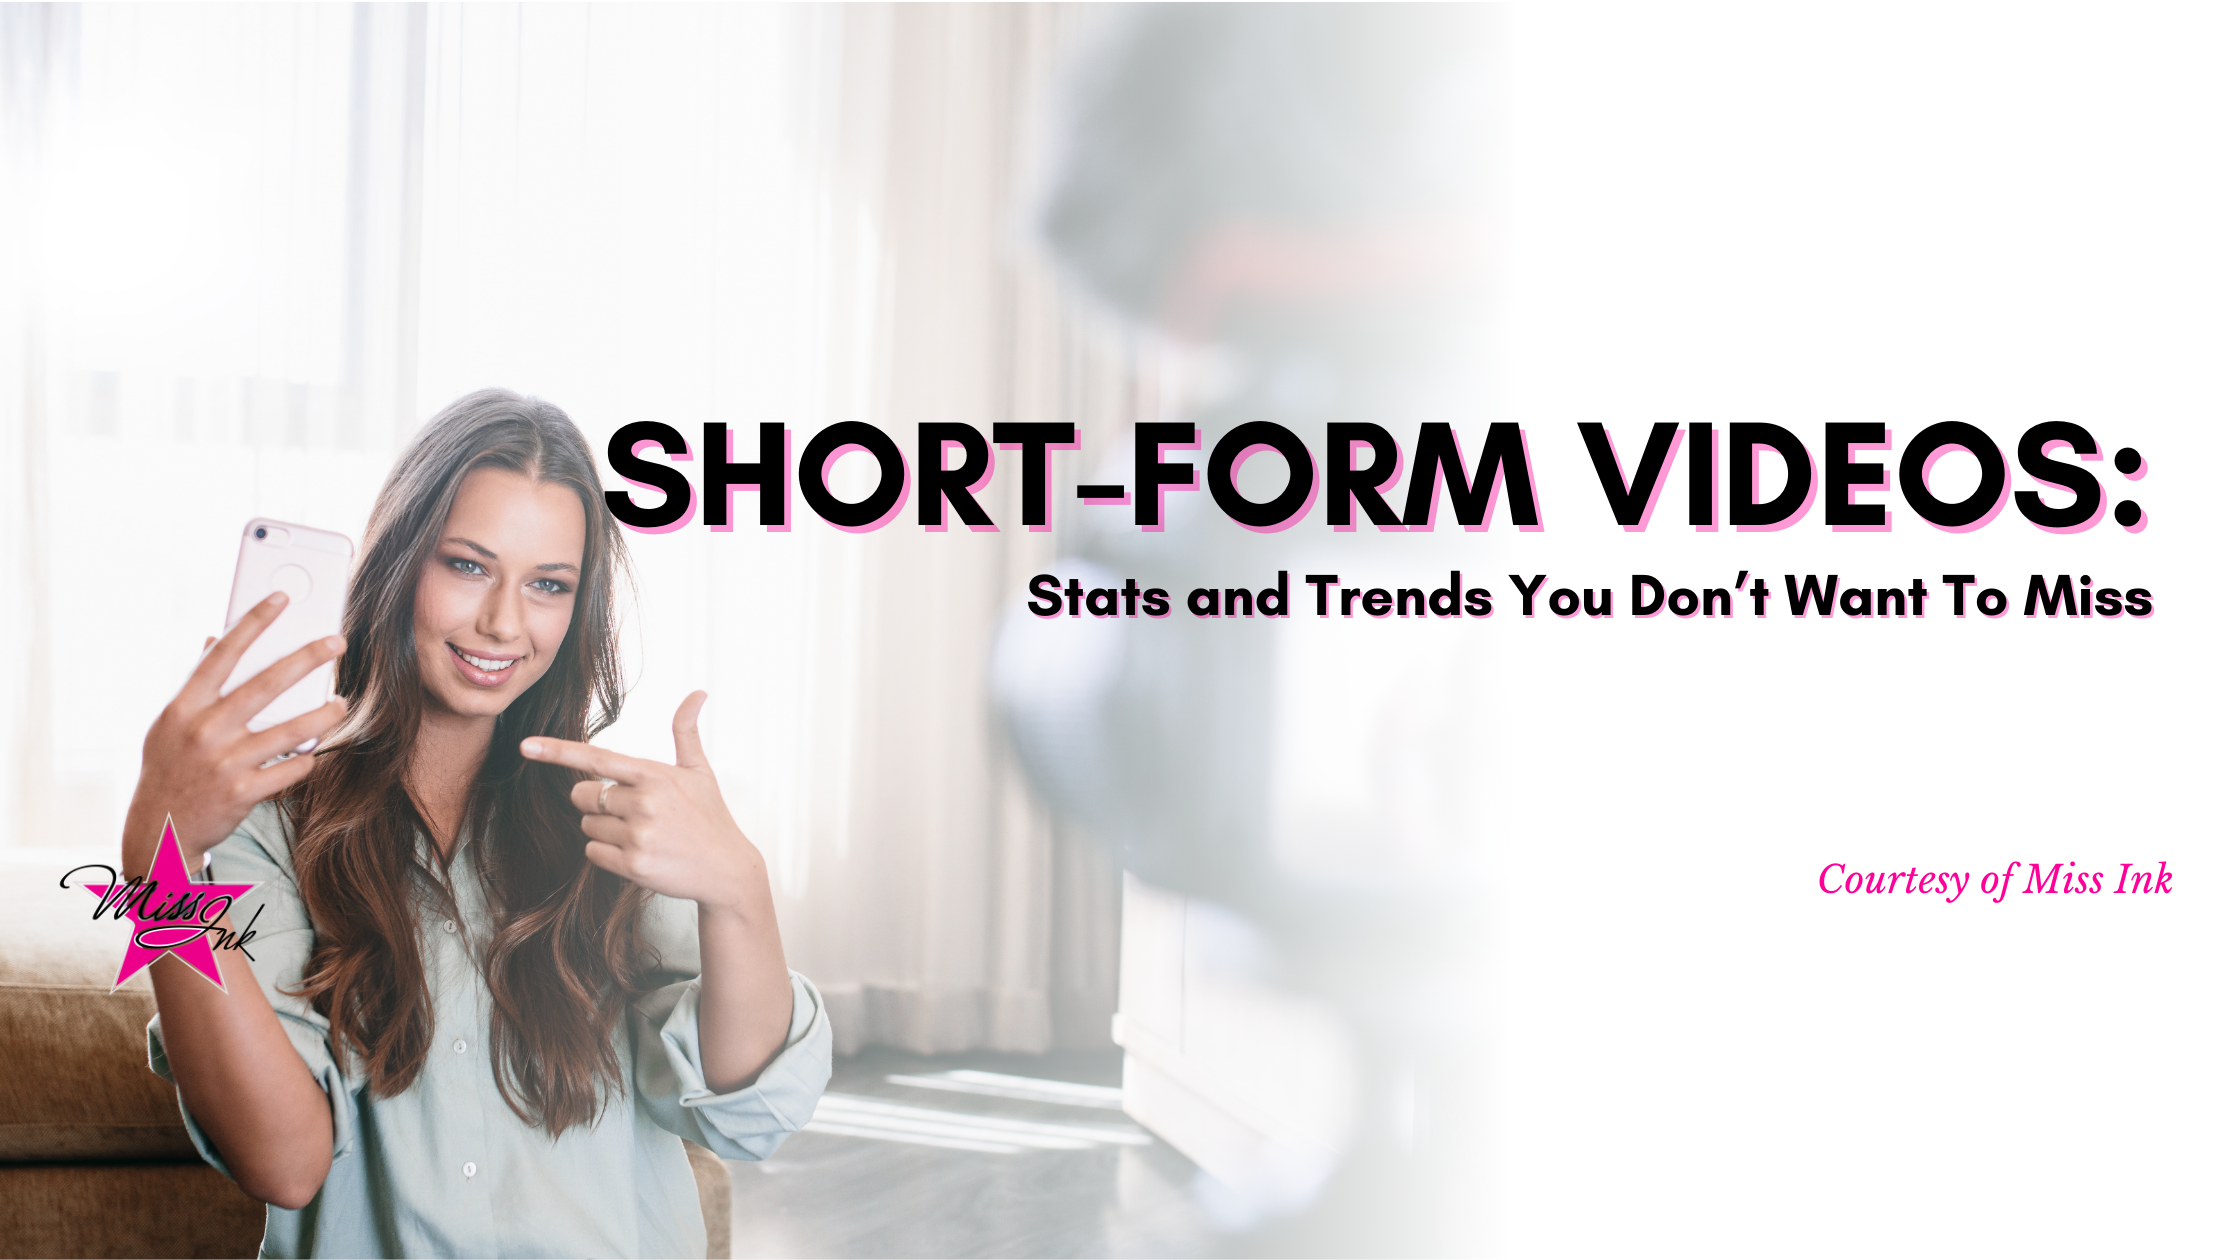 Short-Form Videos: Stats and Trends You Don’t Want To Miss